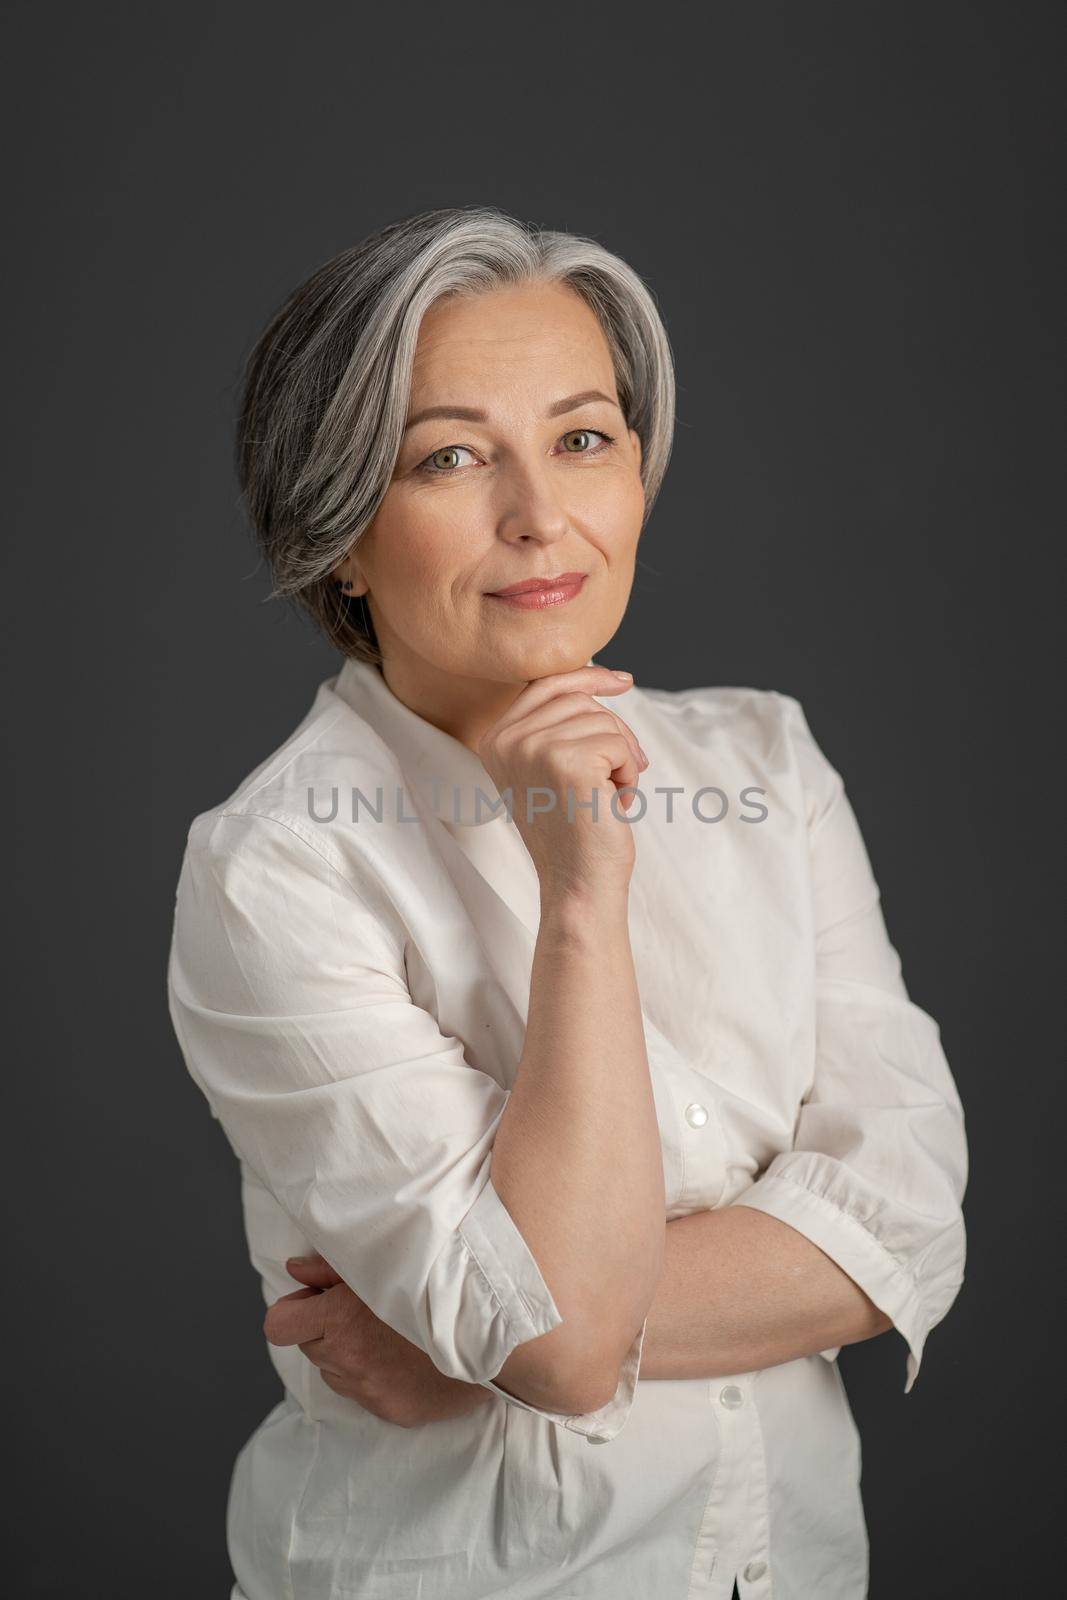 Beautiful gray-haired woman gently smiles while touching her chin with hand and looking at camera. Intelligent beautiful mature lady wearing white shirt standing alone on grey background.